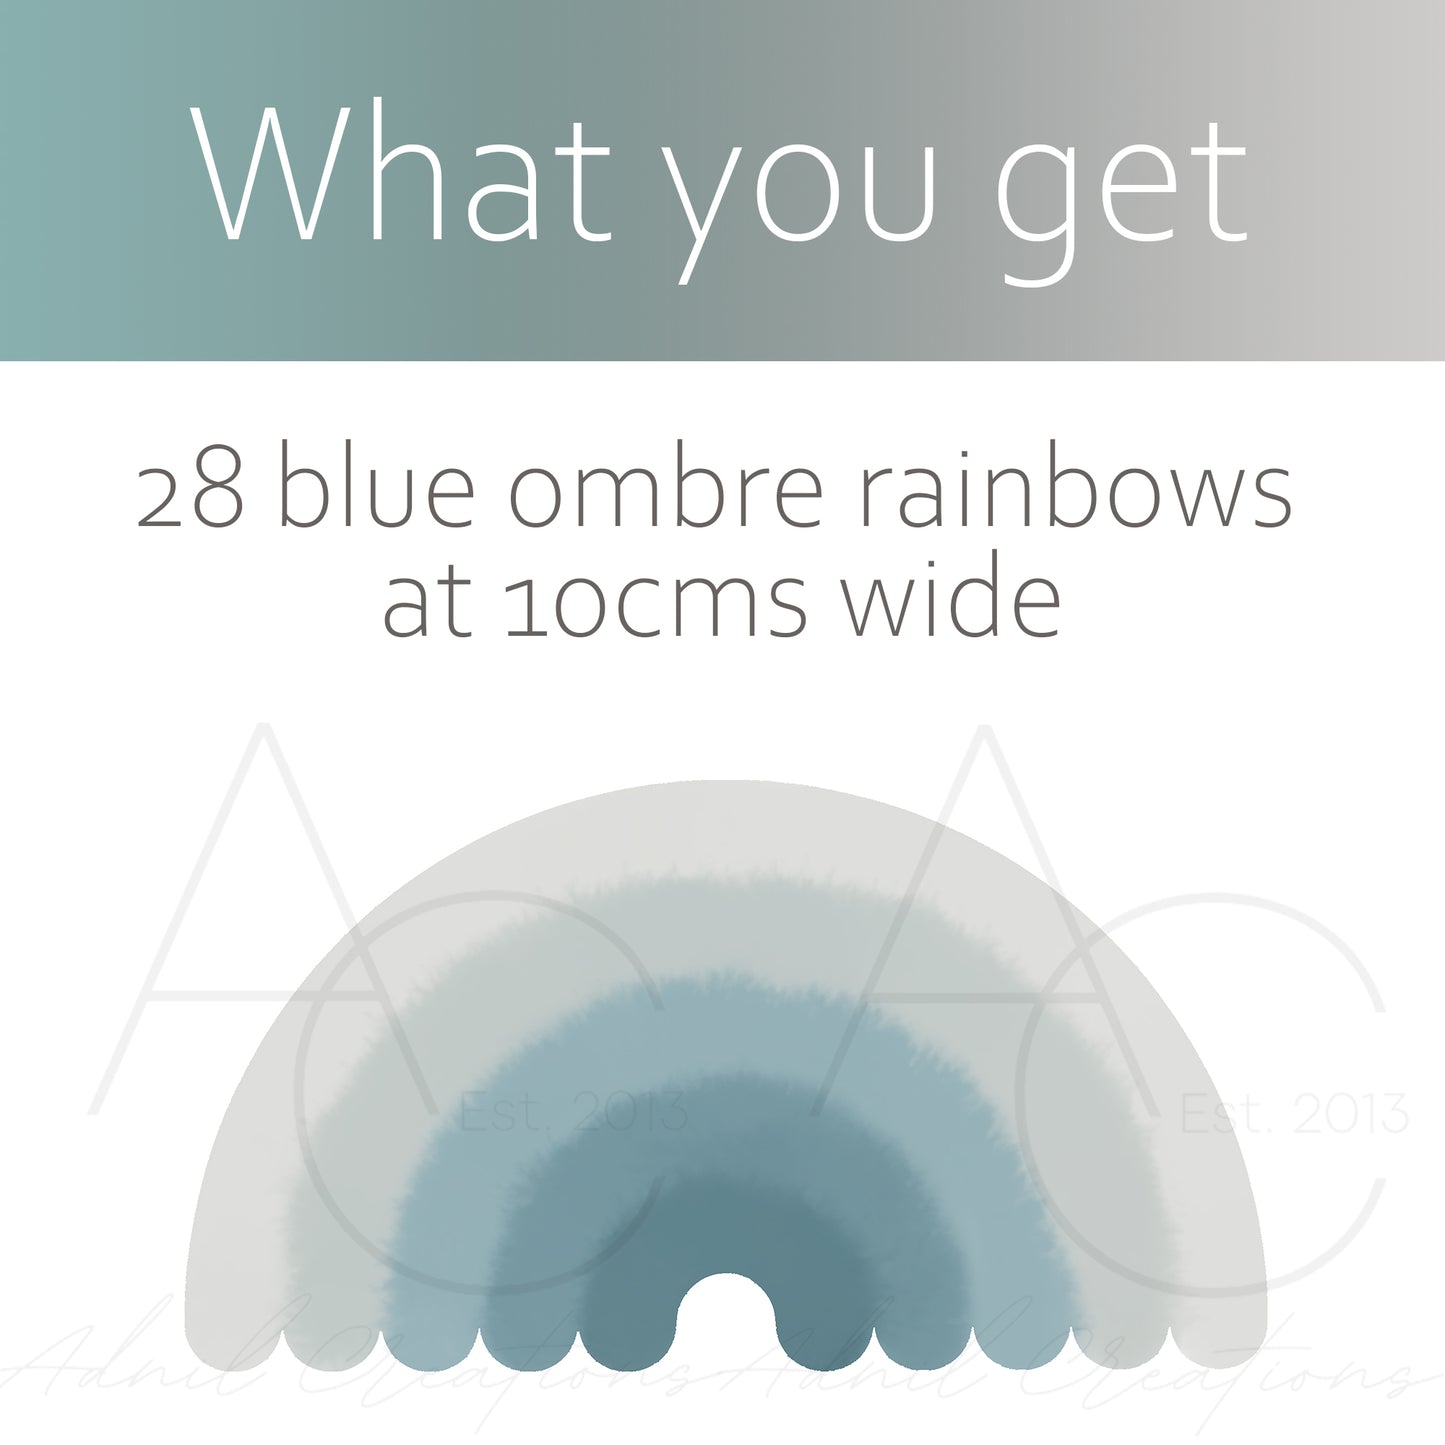 Blue ombre rainbows | Fabric wall stickers